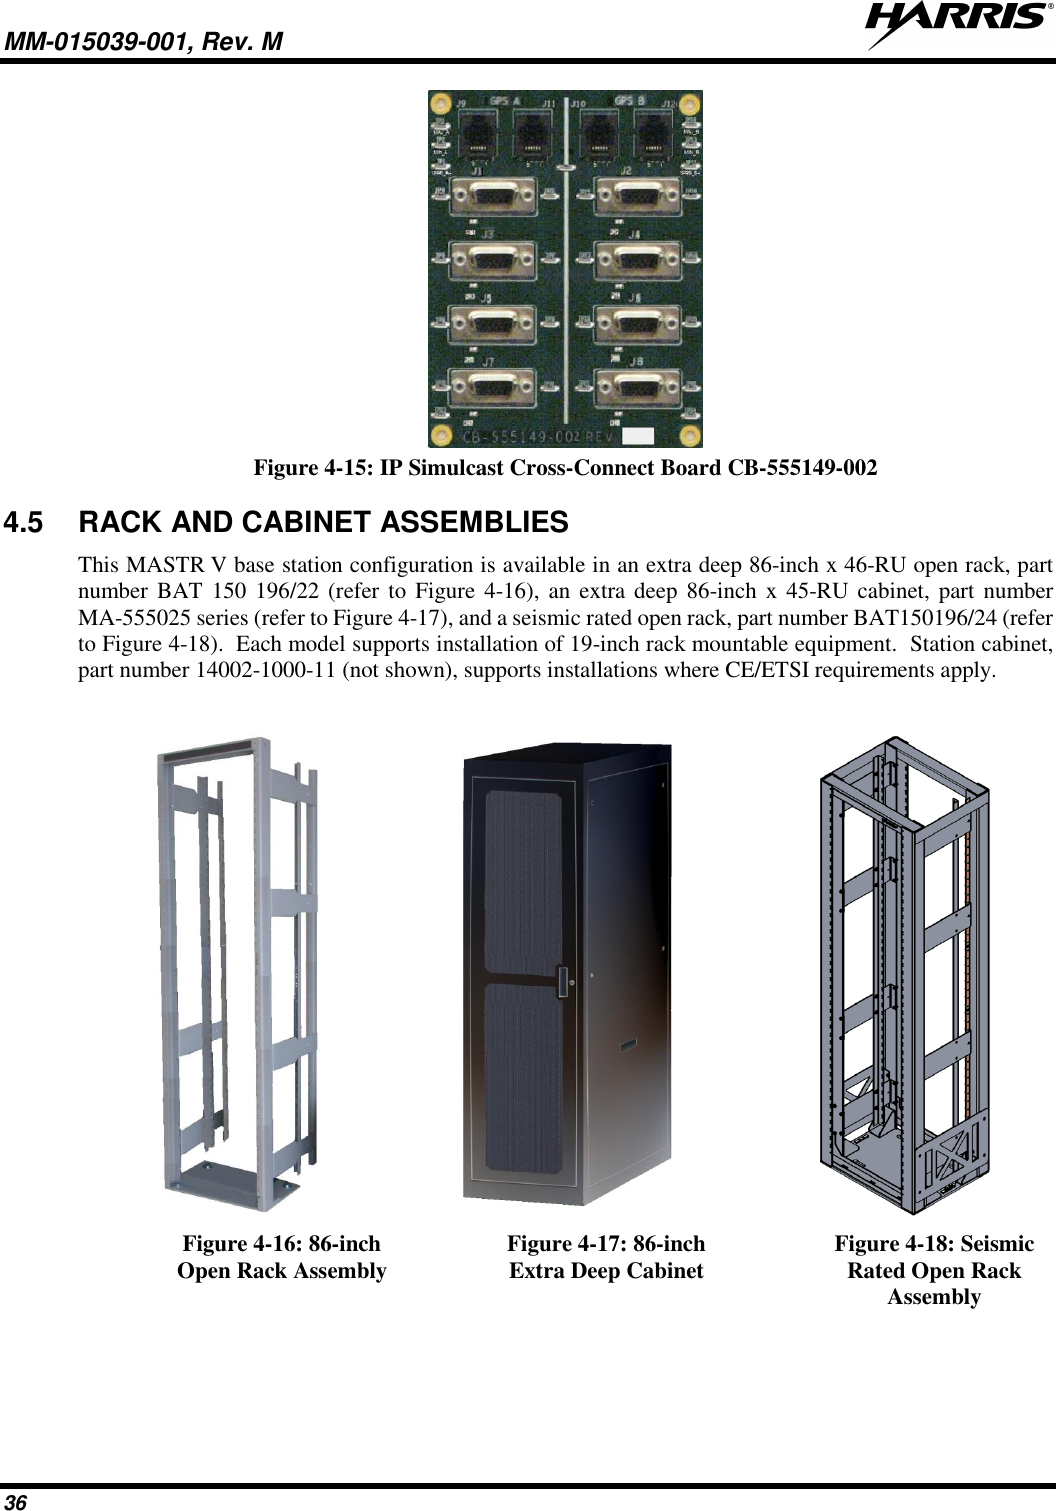 MM-015039-001, Rev. M     36  Figure 4-15: IP Simulcast Cross-Connect Board CB-555149-002 4.5  RACK AND CABINET ASSEMBLIES This MASTR V base station configuration is available in an extra deep 86-inch x 46-RU open rack, part number BAT 150 196/22 (refer to Figure 4-16), an extra deep  86-inch  x  45-RU cabinet,  part  number MA-555025 series (refer to Figure 4-17), and a seismic rated open rack, part number BAT150196/24 (refer to Figure 4-18).  Each model supports installation of 19-inch rack mountable equipment.  Station cabinet, part number 14002-1000-11 (not shown), supports installations where CE/ETSI requirements apply.     Figure 4-16: 86-inch Open Rack Assembly Figure 4-17: 86-inch Extra Deep Cabinet Figure 4-18: Seismic Rated Open Rack Assembly  